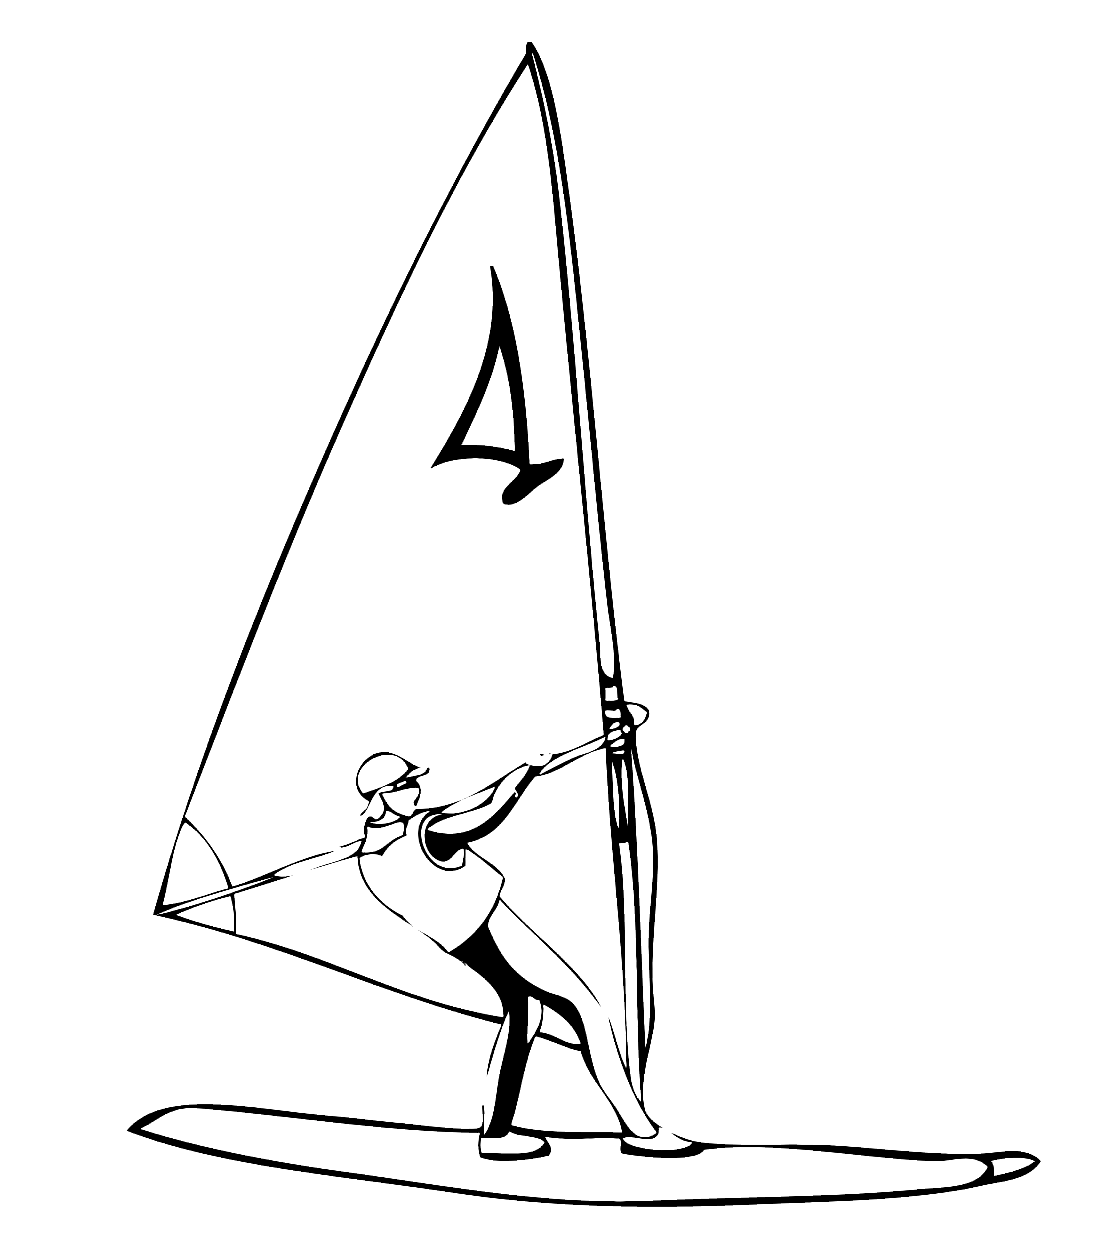 Windsurfer Coloring Page